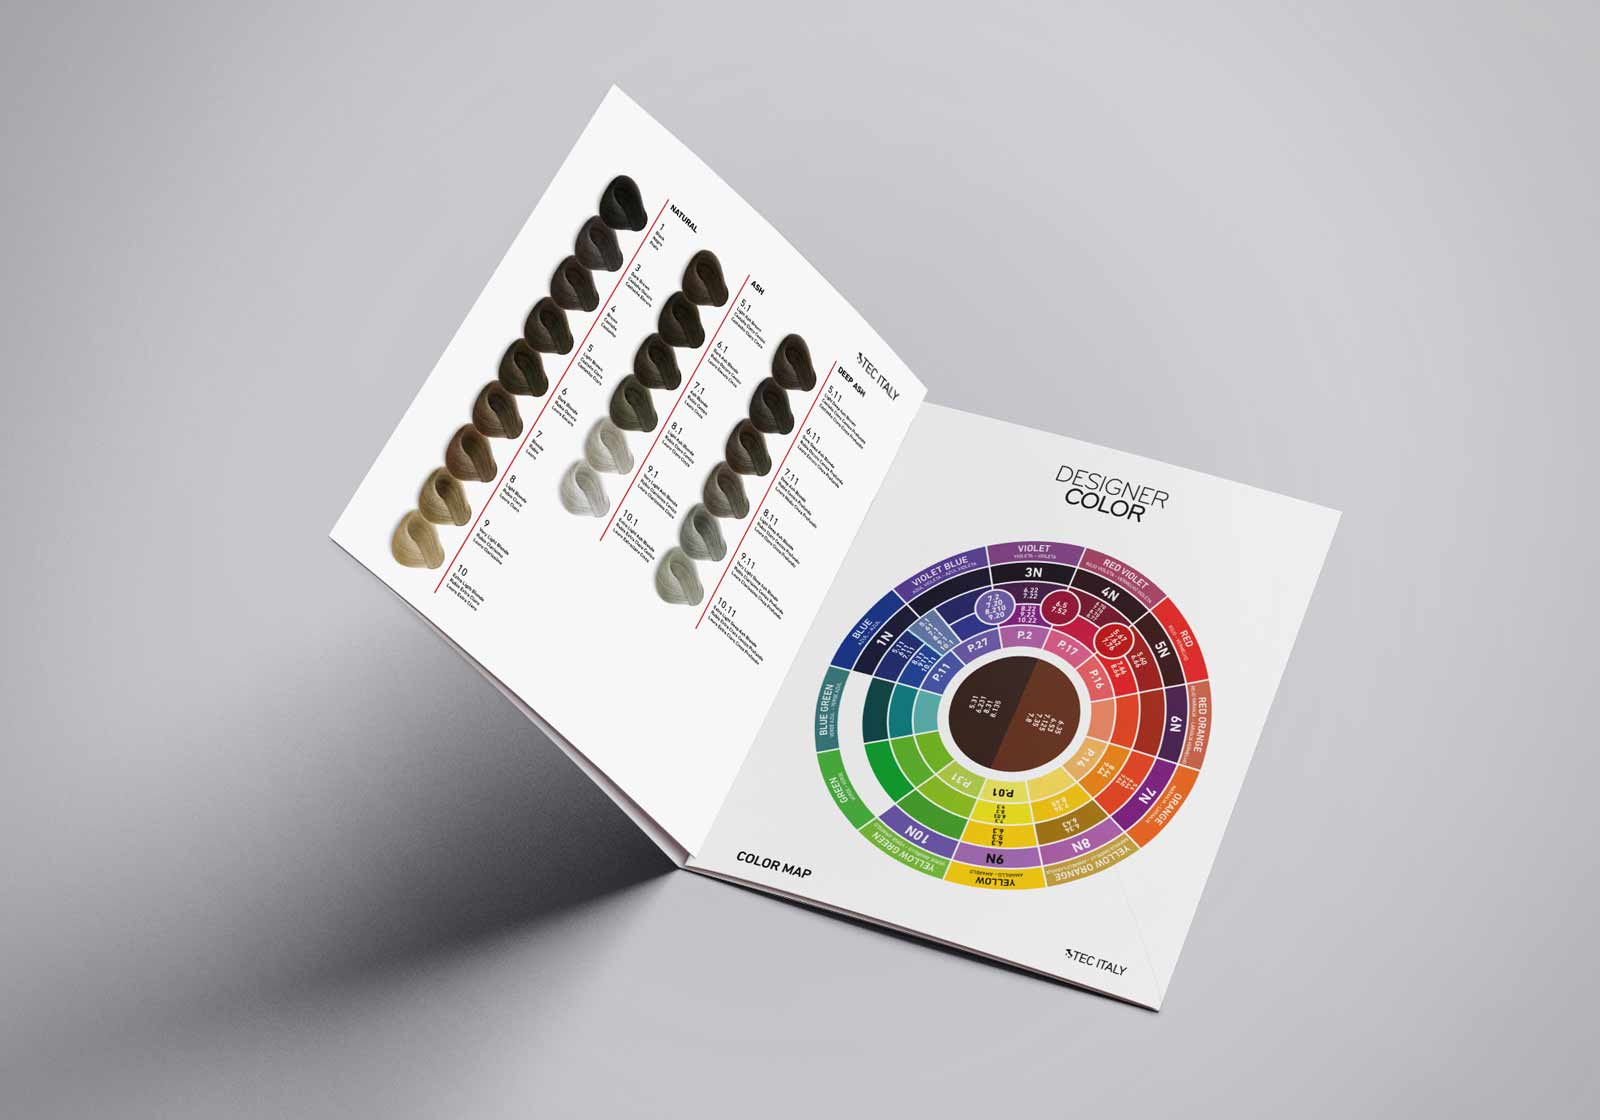 All white open book showcasing the hair color swatches on the left and the color wheel on the right for the the new Tec Italy Designer Color Gama, launched in 2021.